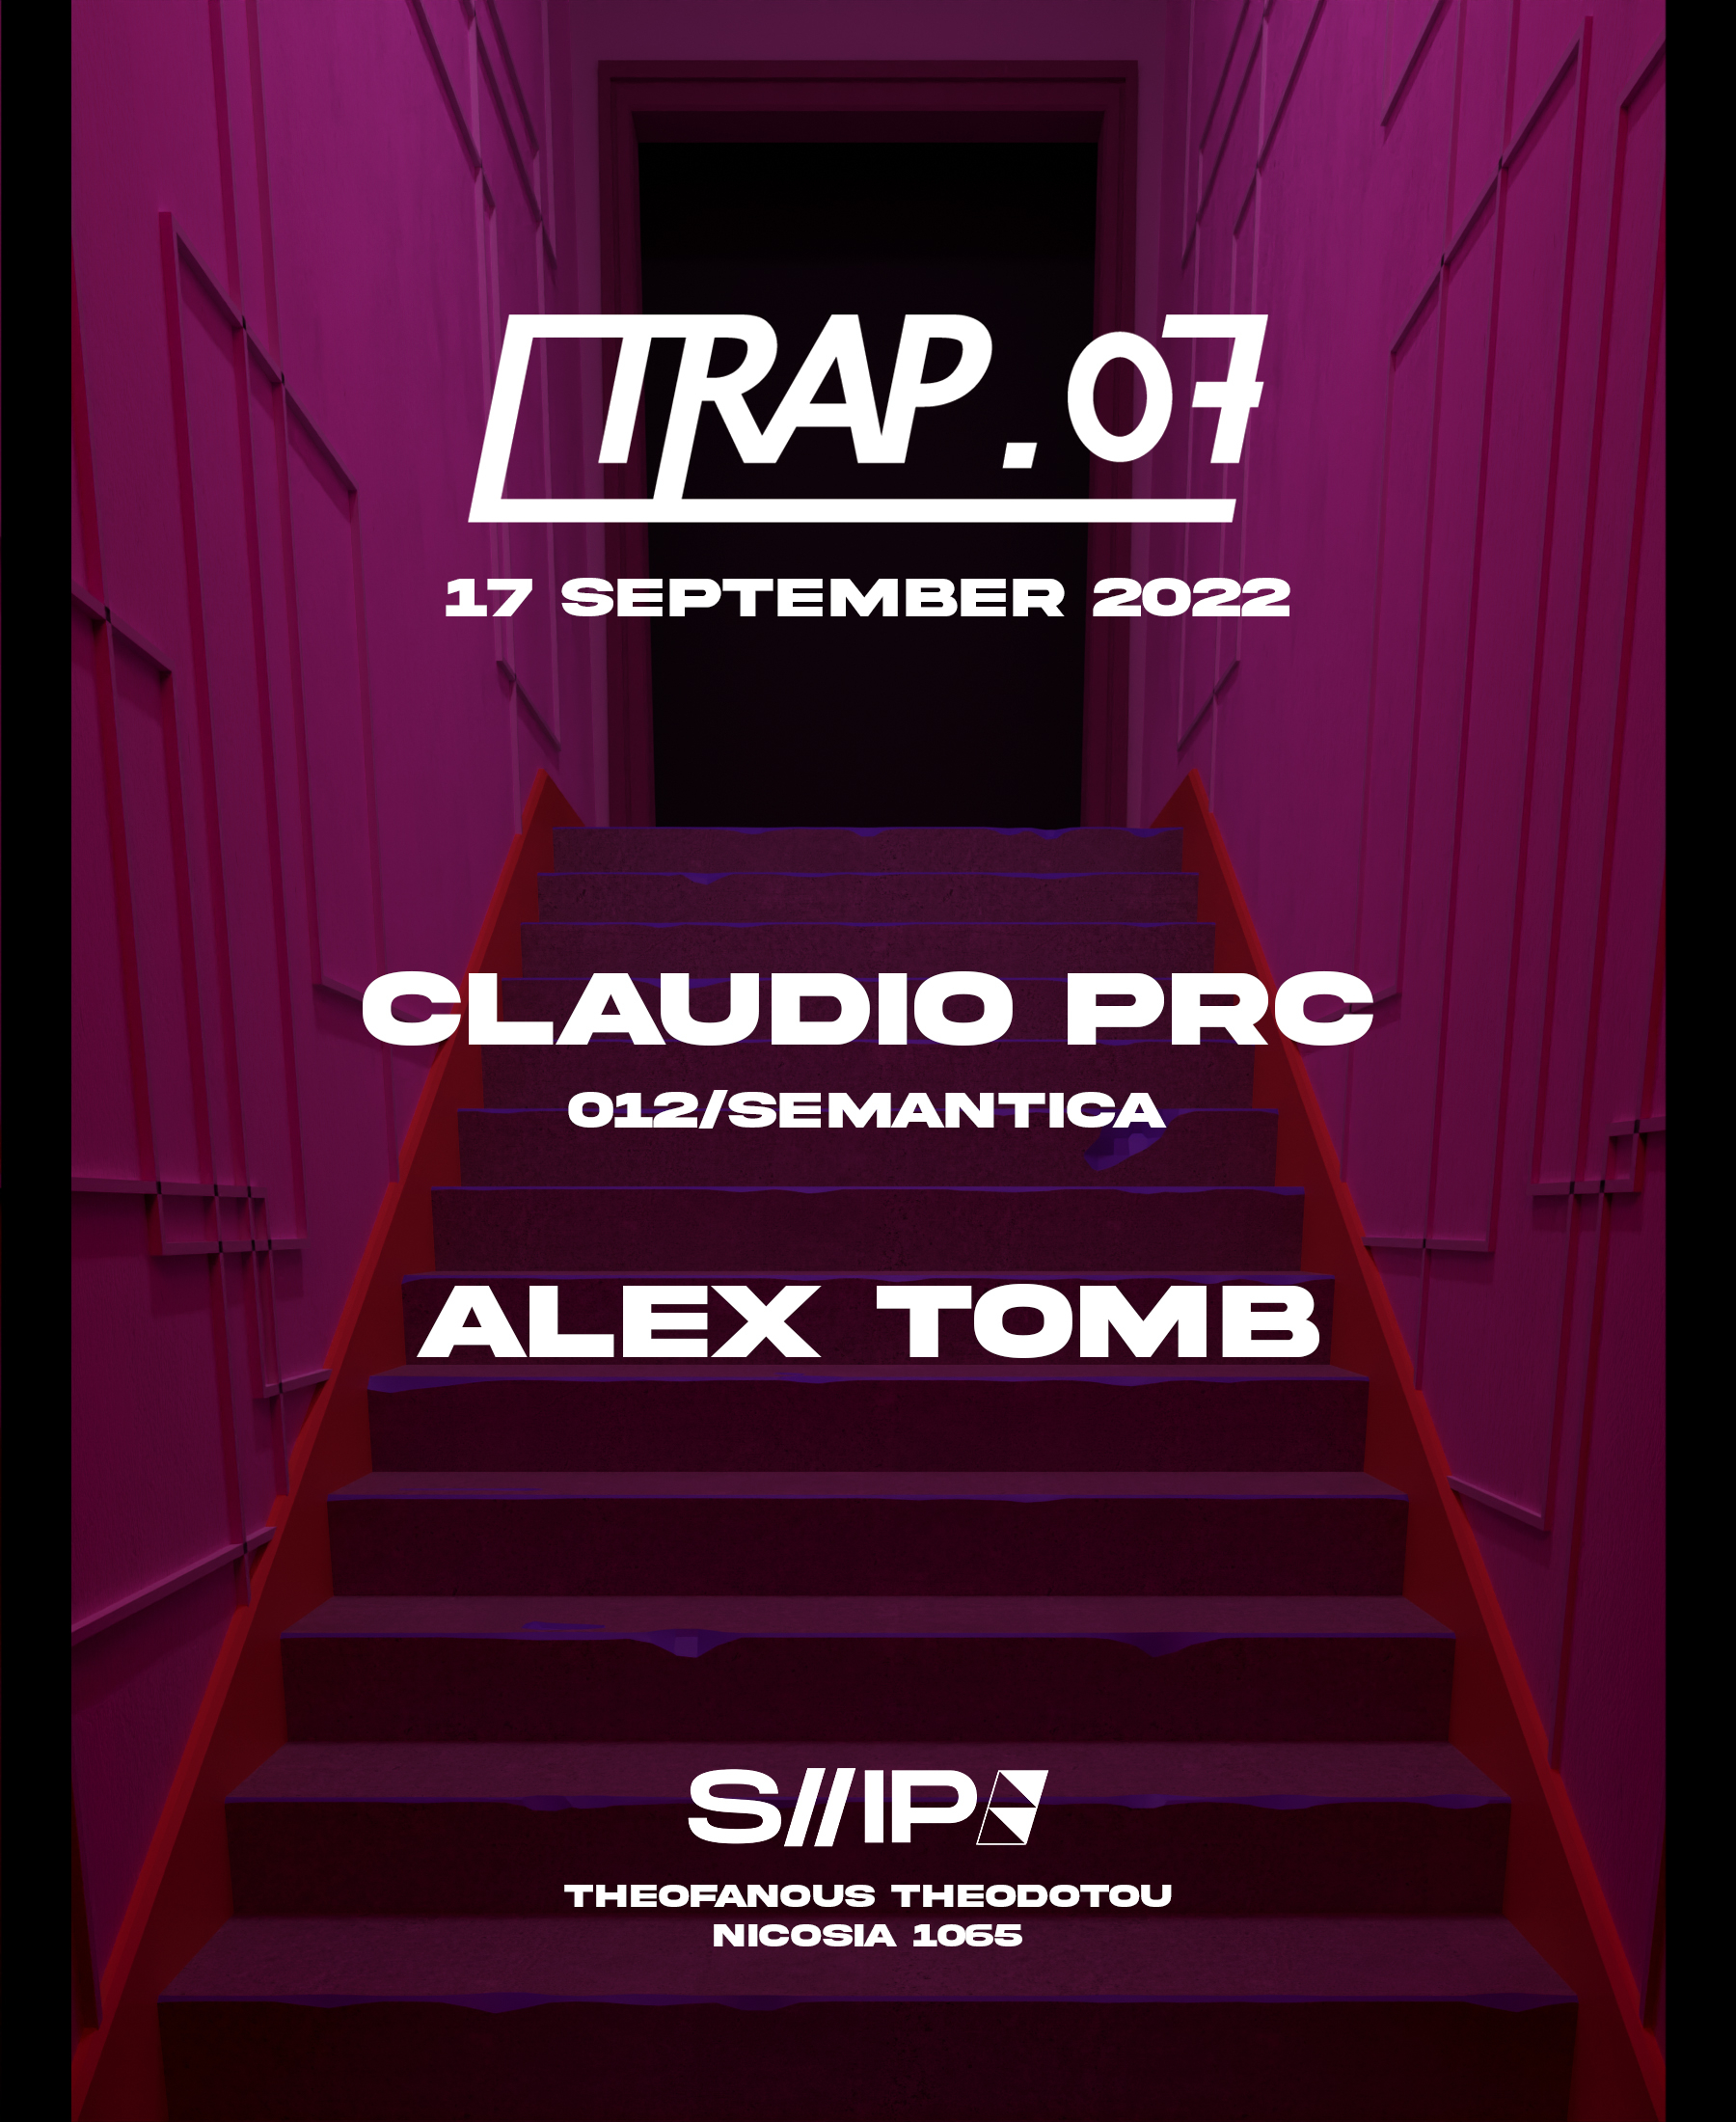 TRAP.07 - Flyer front